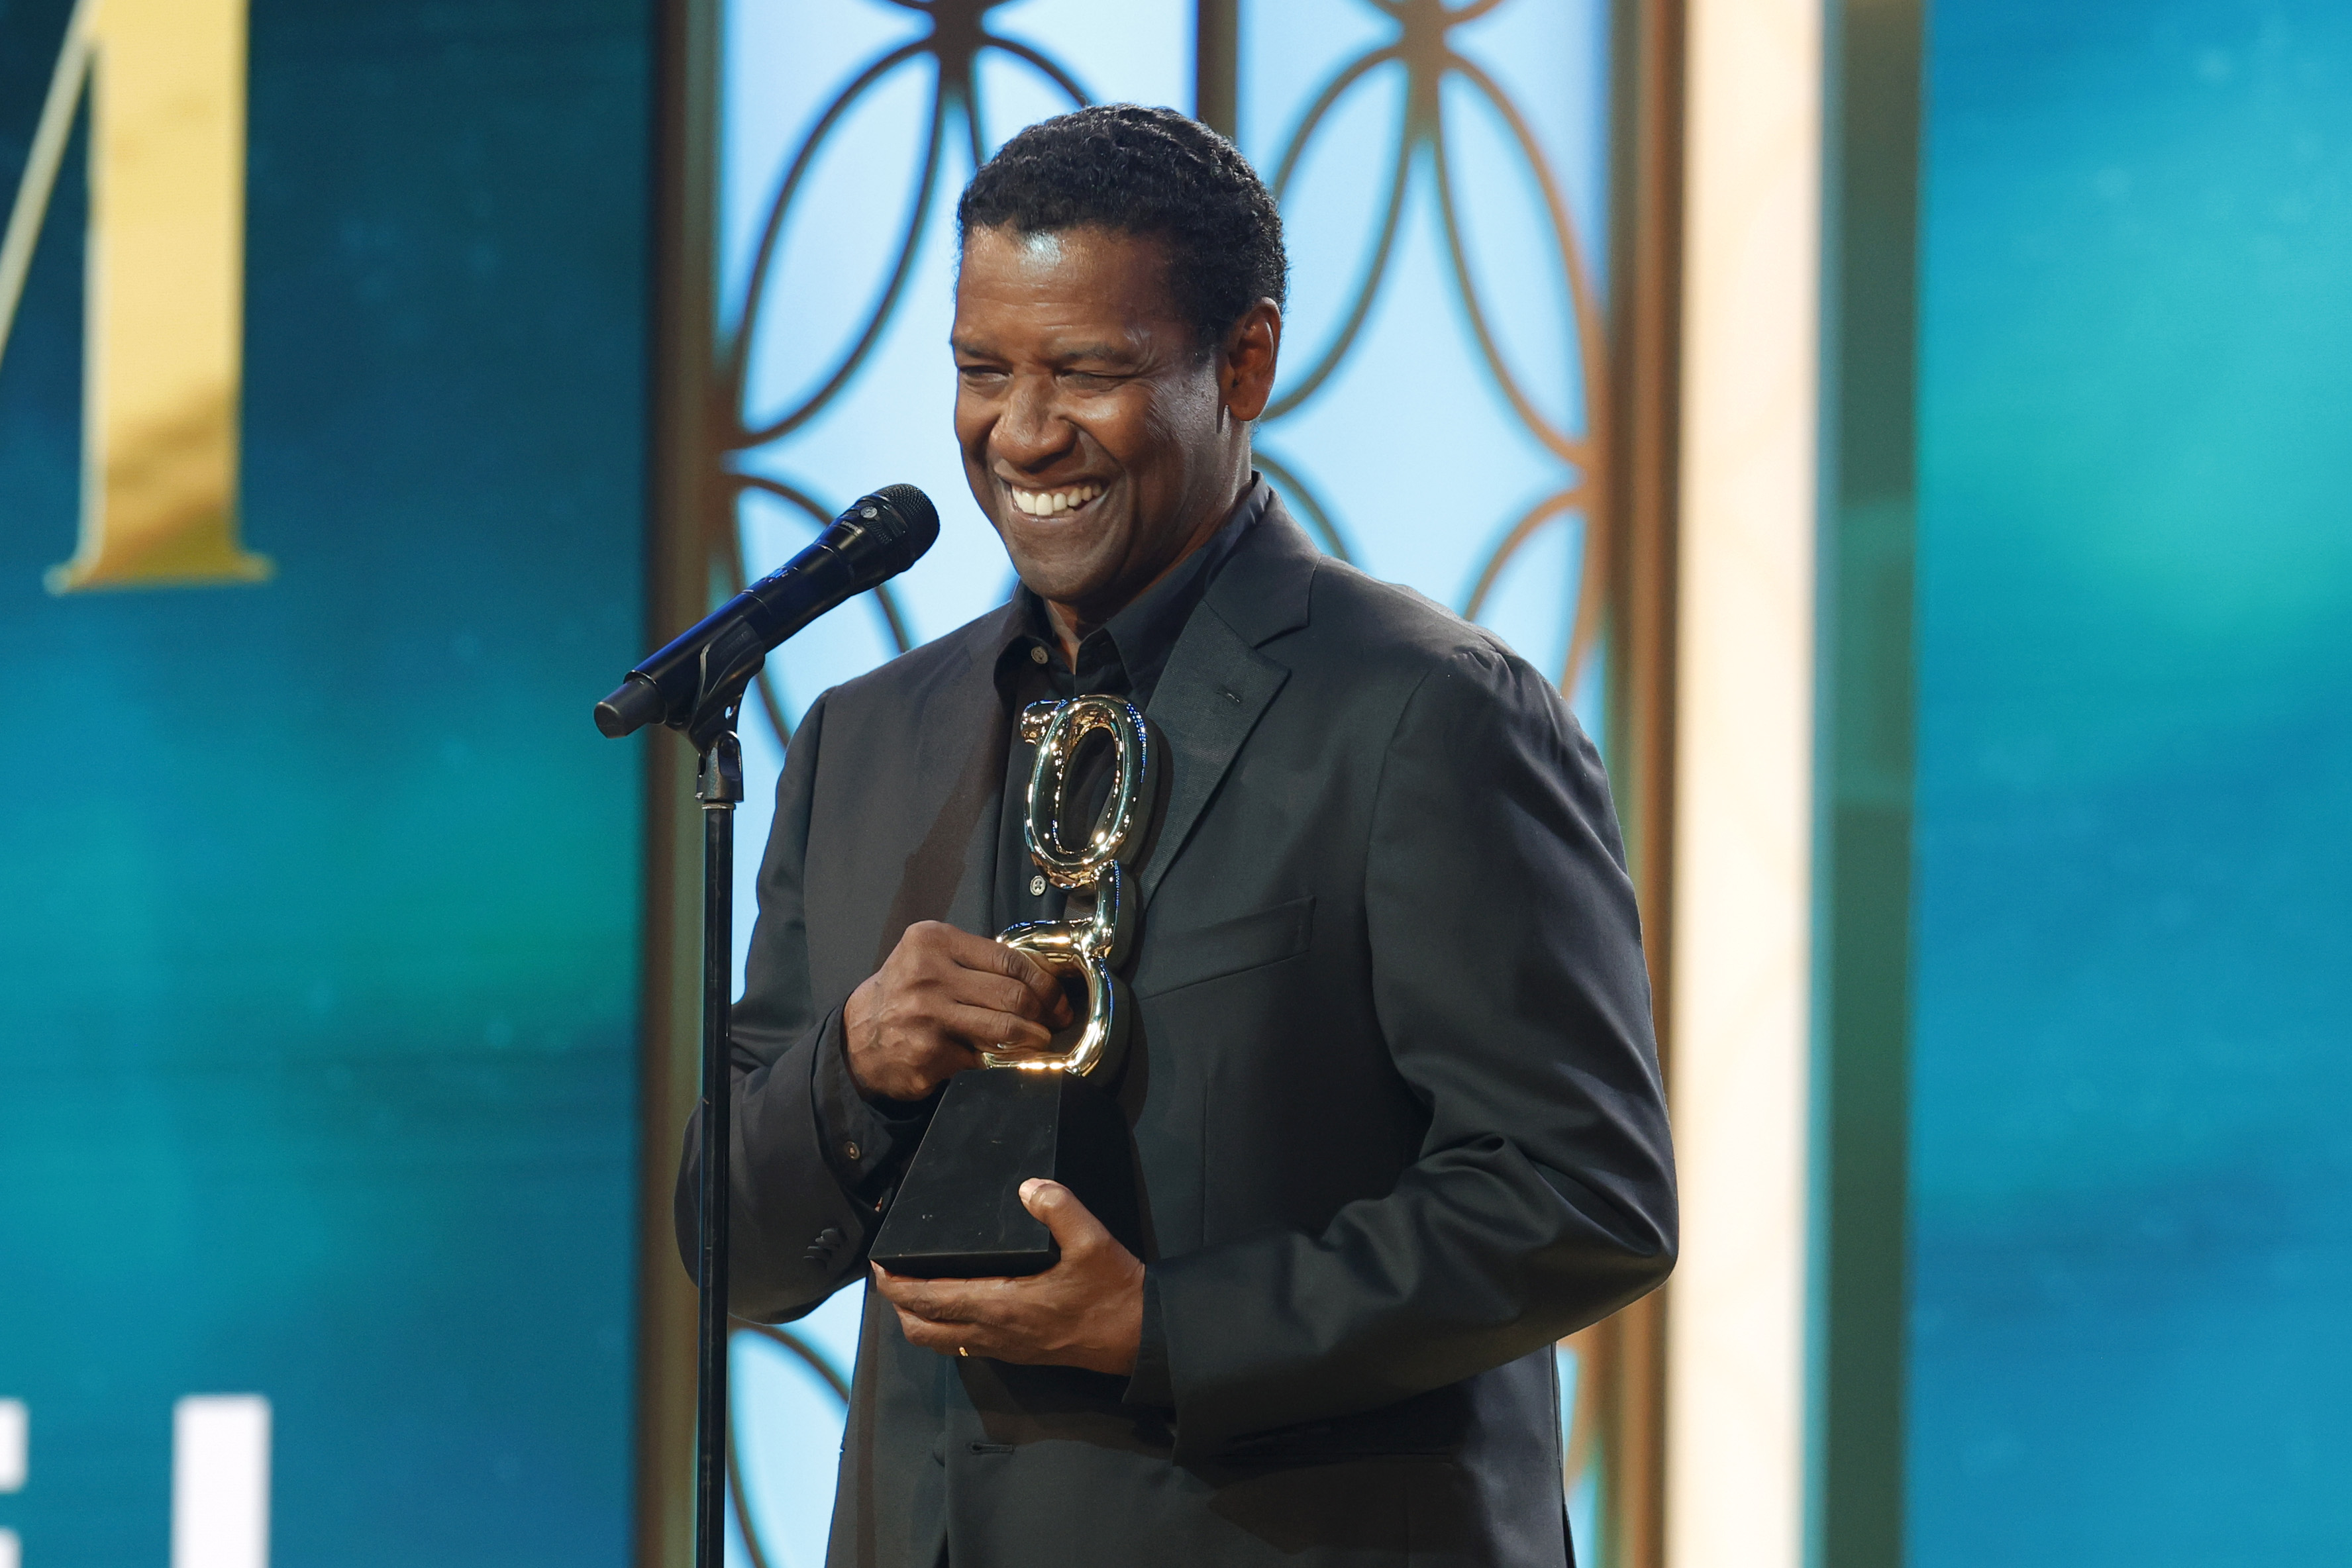 Denzel Washington receiving the Film Icon Award during the 2nd Annual theGrio Awards in Beverly Hills, California on October 21, 2023 | Source: Getty Images